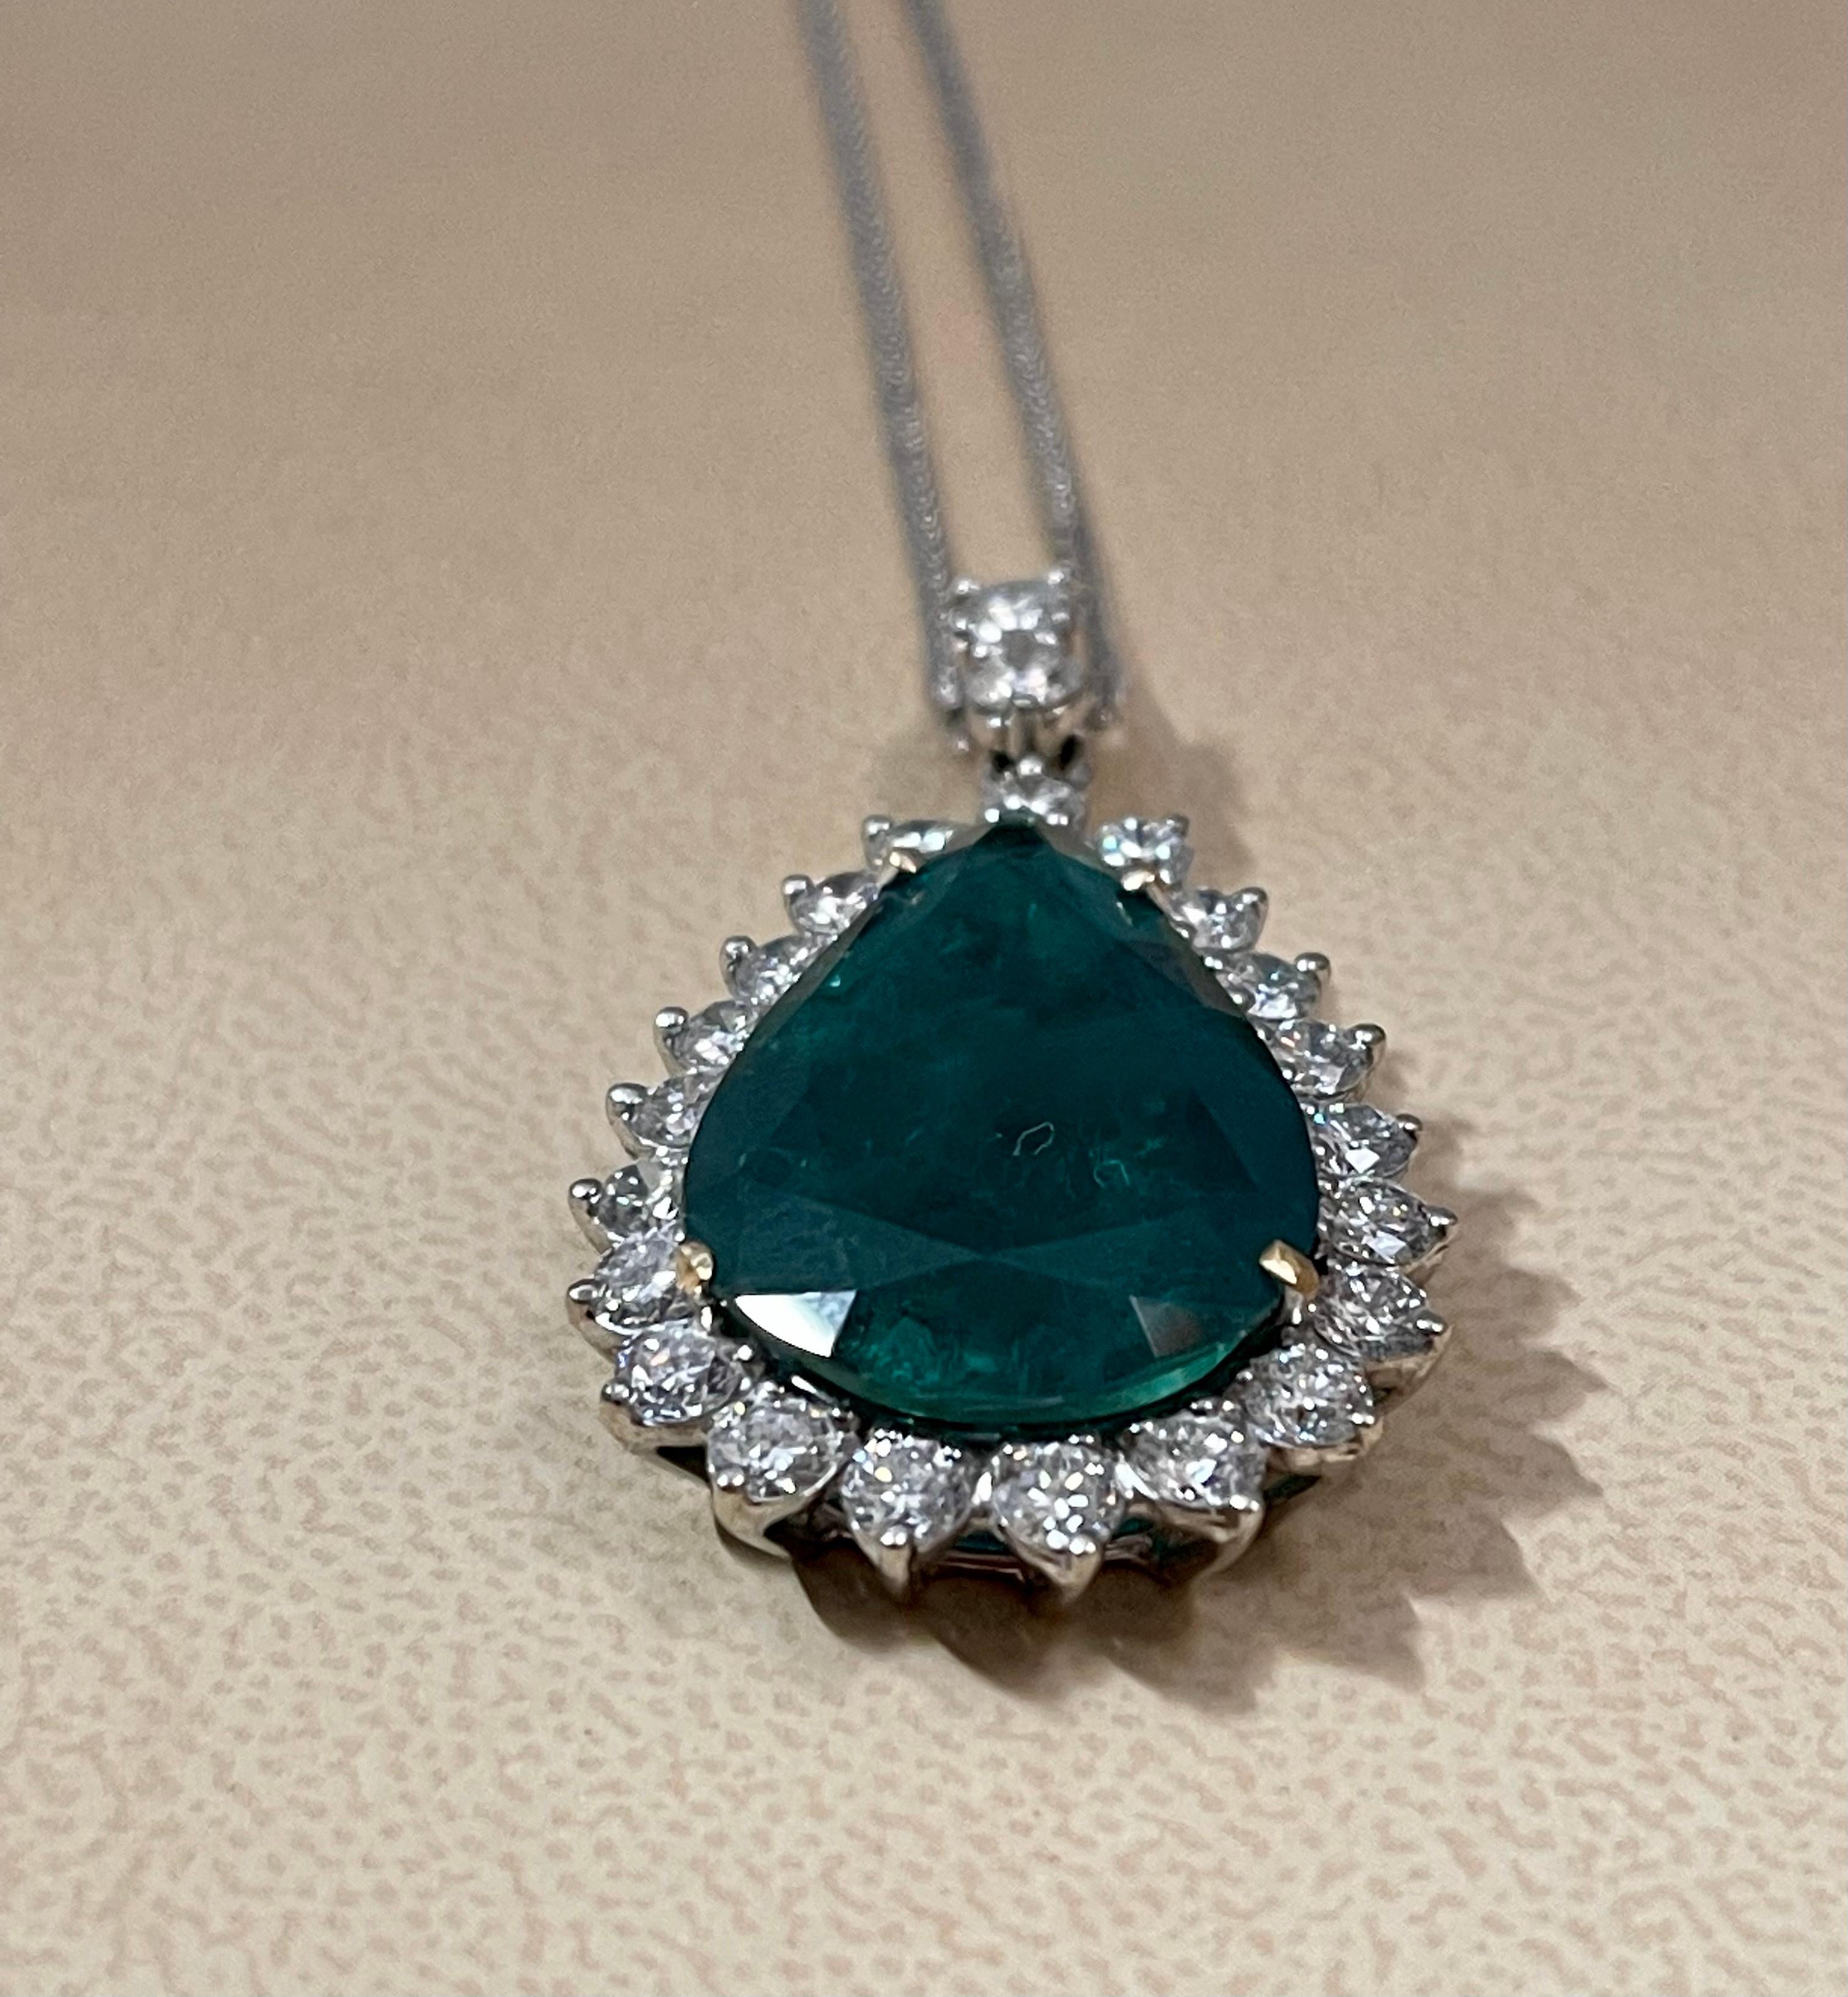 15 Ct Pear Hydro Emerald & 4 Ct Diamond Pendent/Necklace 18 Kt White Gold For Sale 1